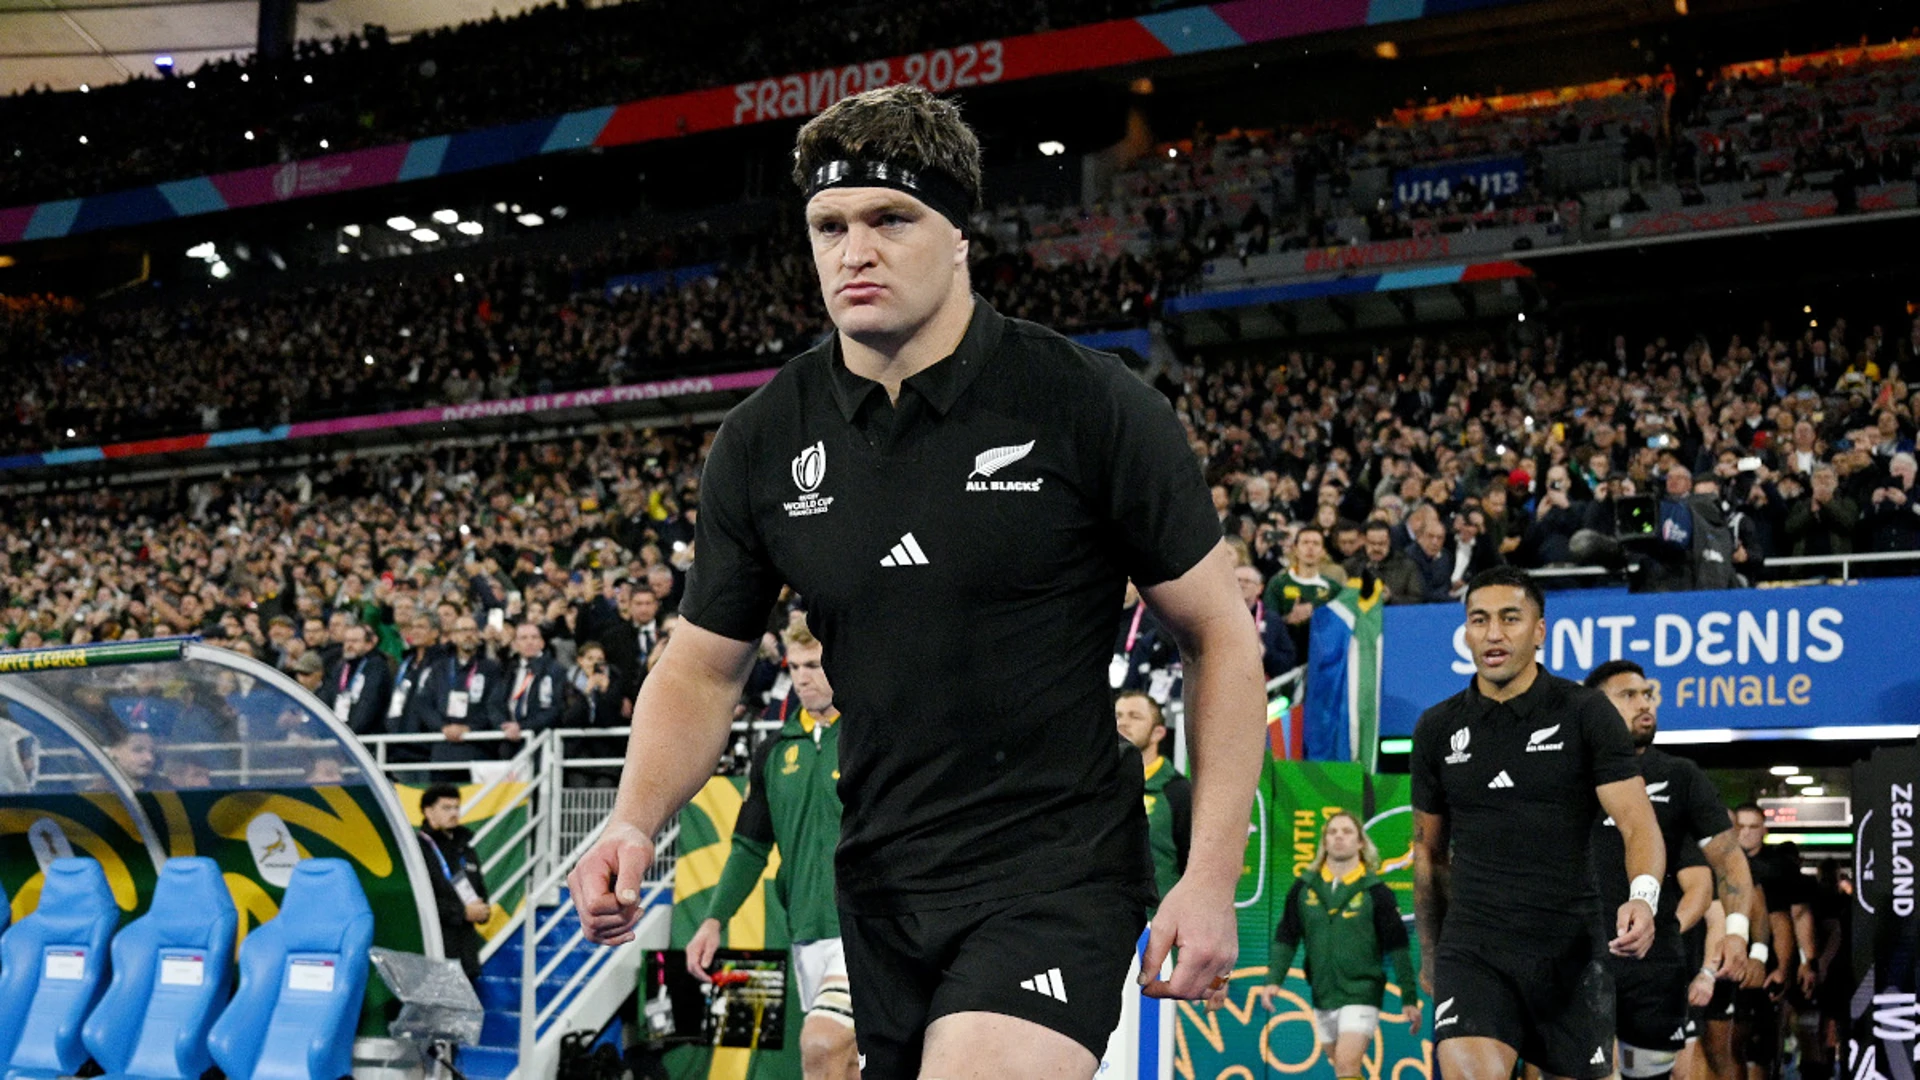 Robertson's All Blacks project faces first test against England